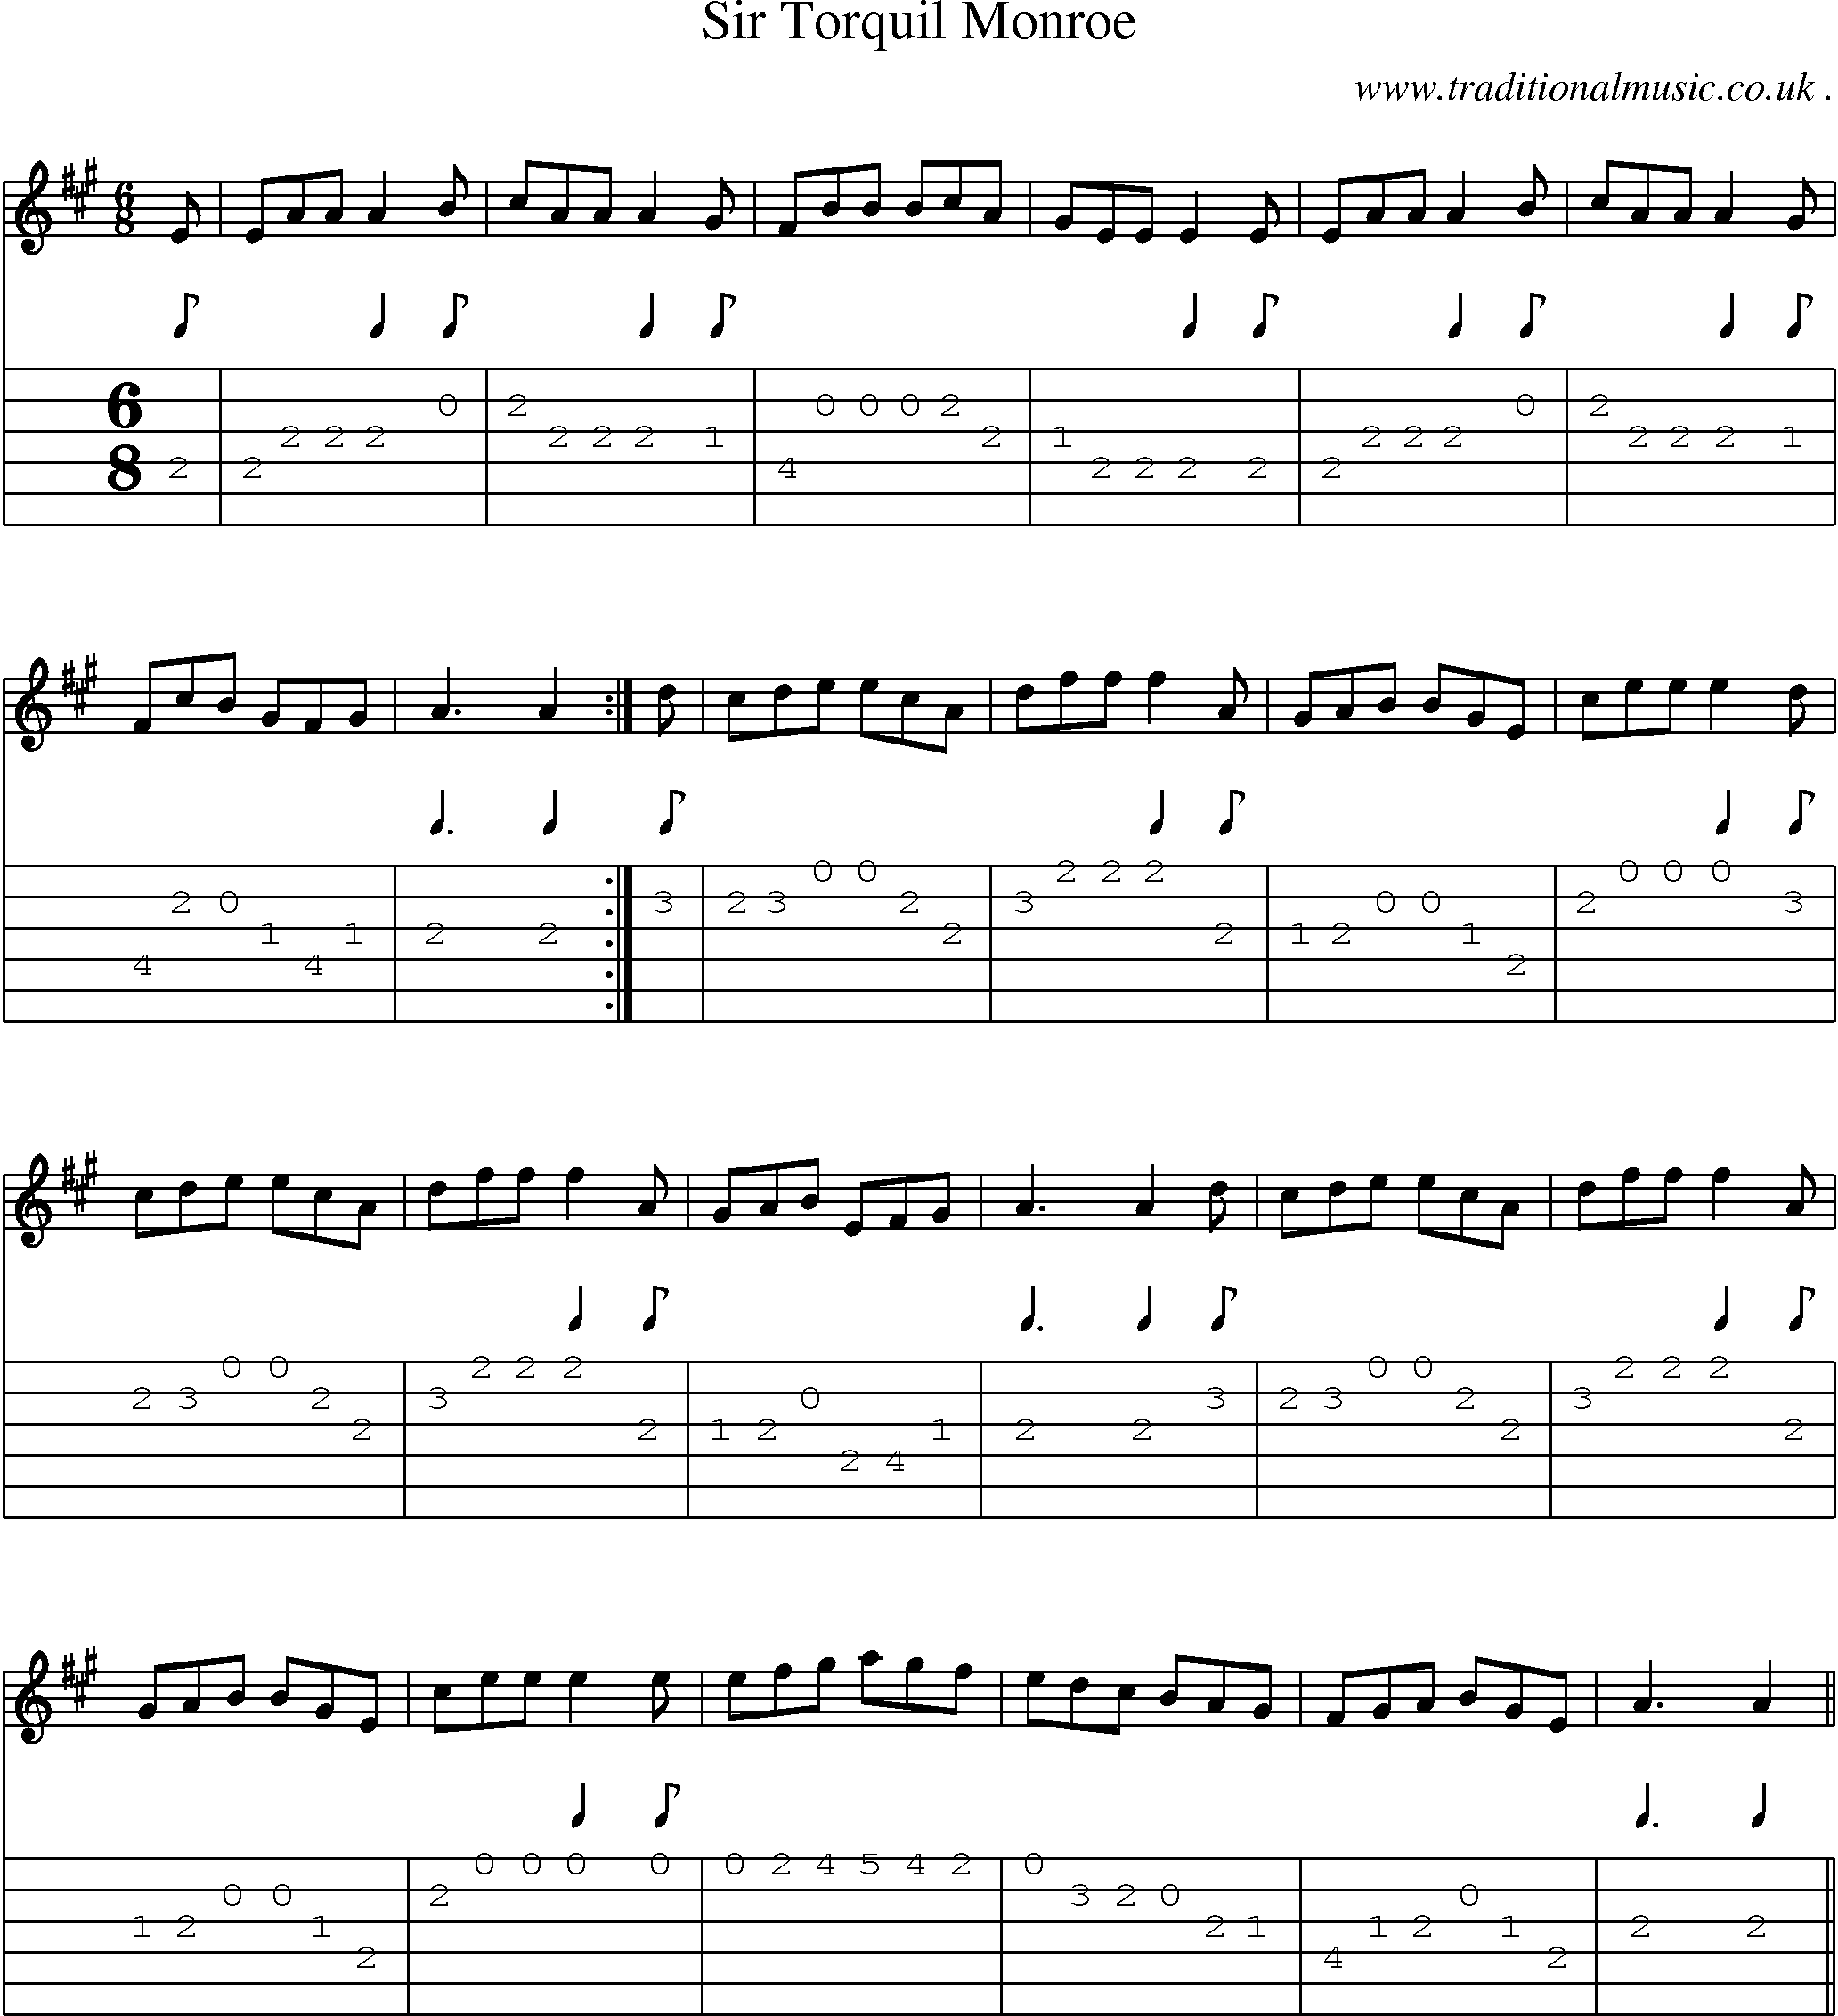 Sheet-Music and Guitar Tabs for Sir Torquil Monroe